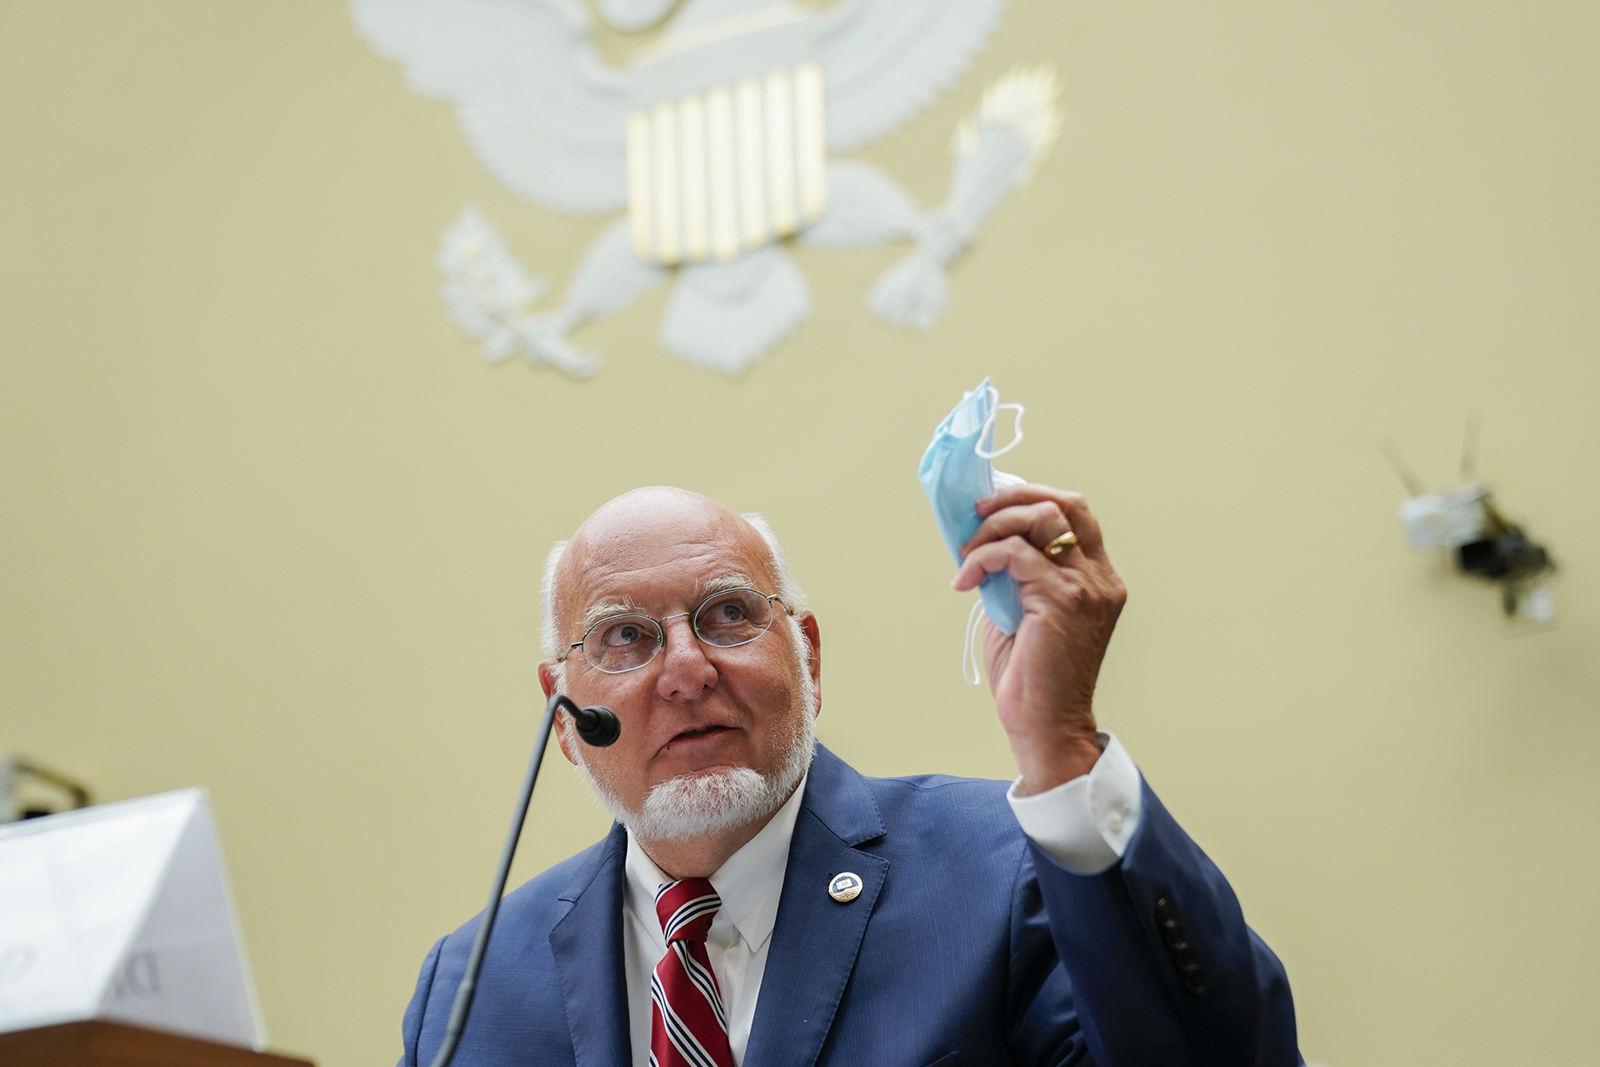 Robert Redfield, director of the Centers for Disease Control and Prevention holds a protective mask while testifying during a House Select Subcommittee on the Coronavirus Crisis hearing on July 31 in Washington.